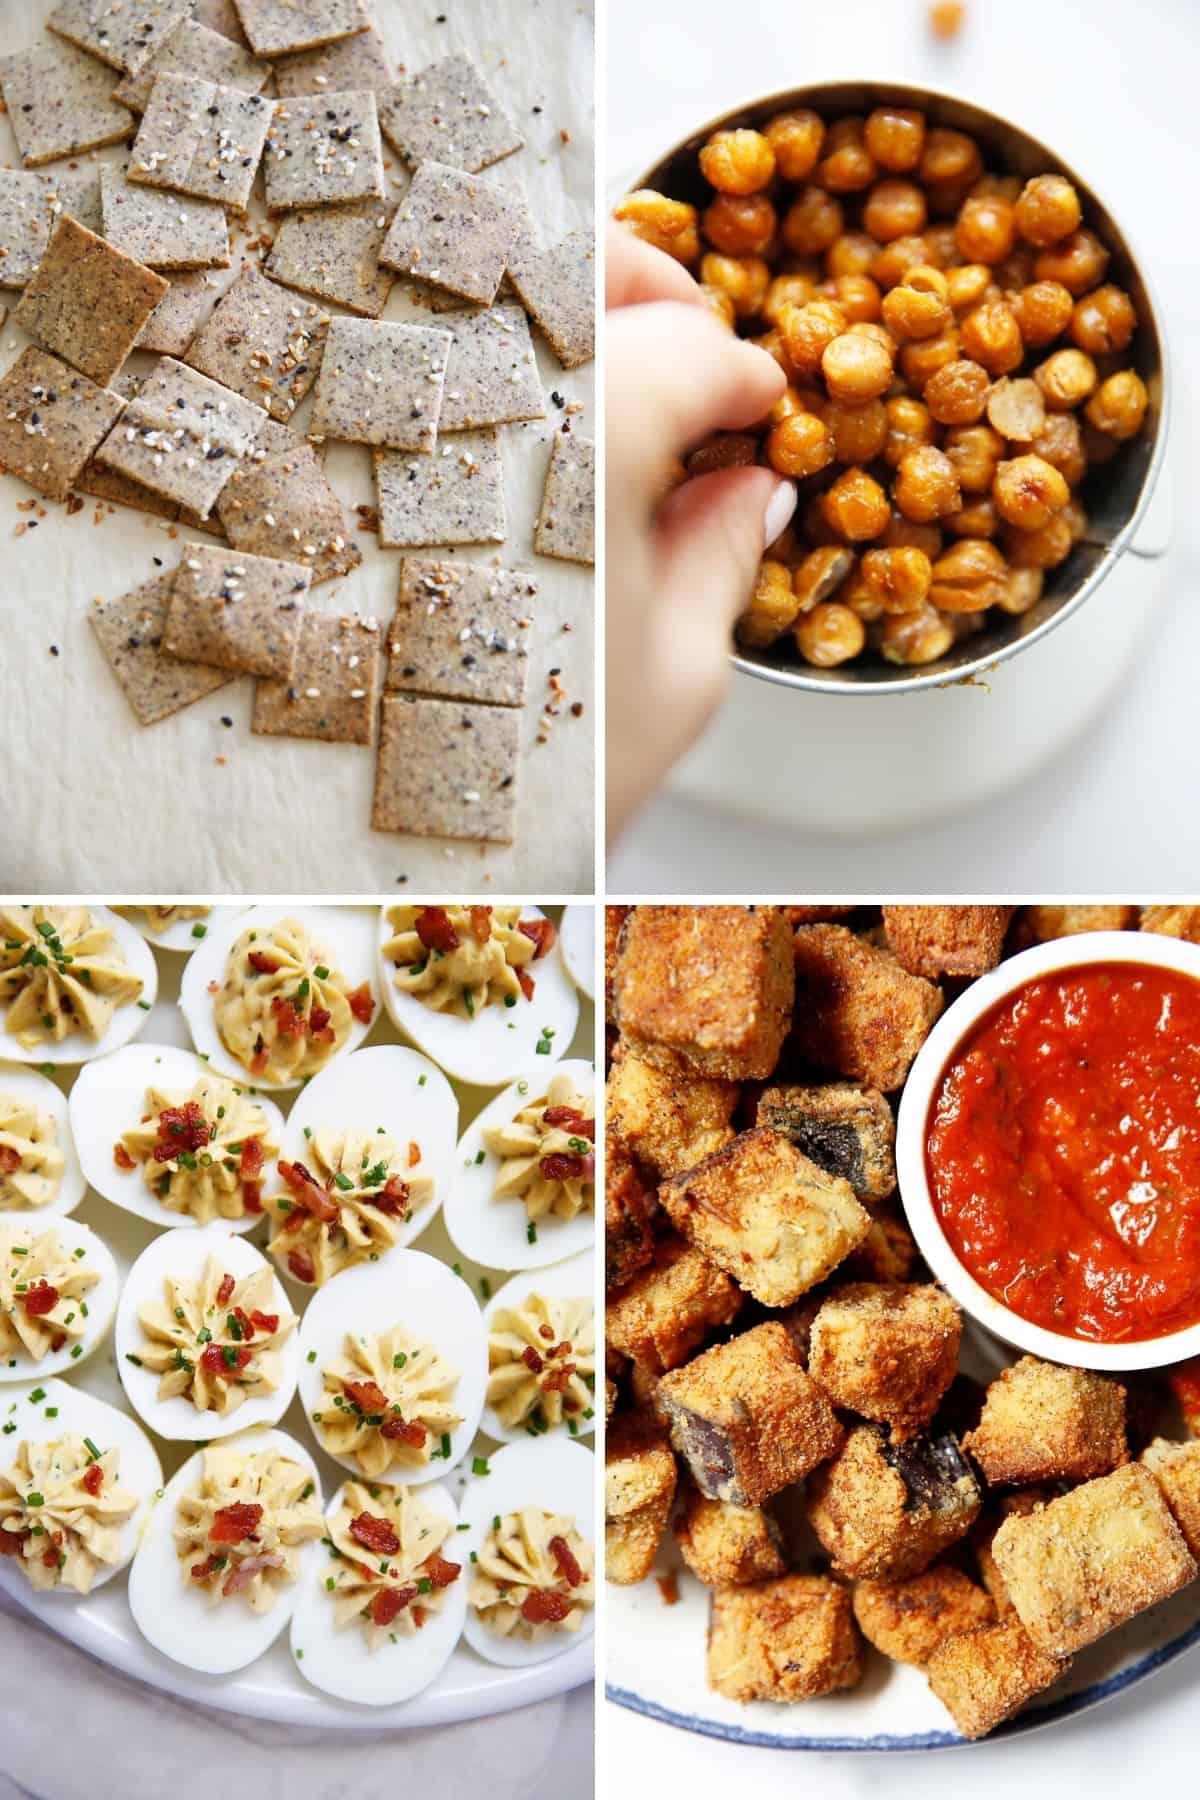 Healthy paleo snack recipes to make at home.